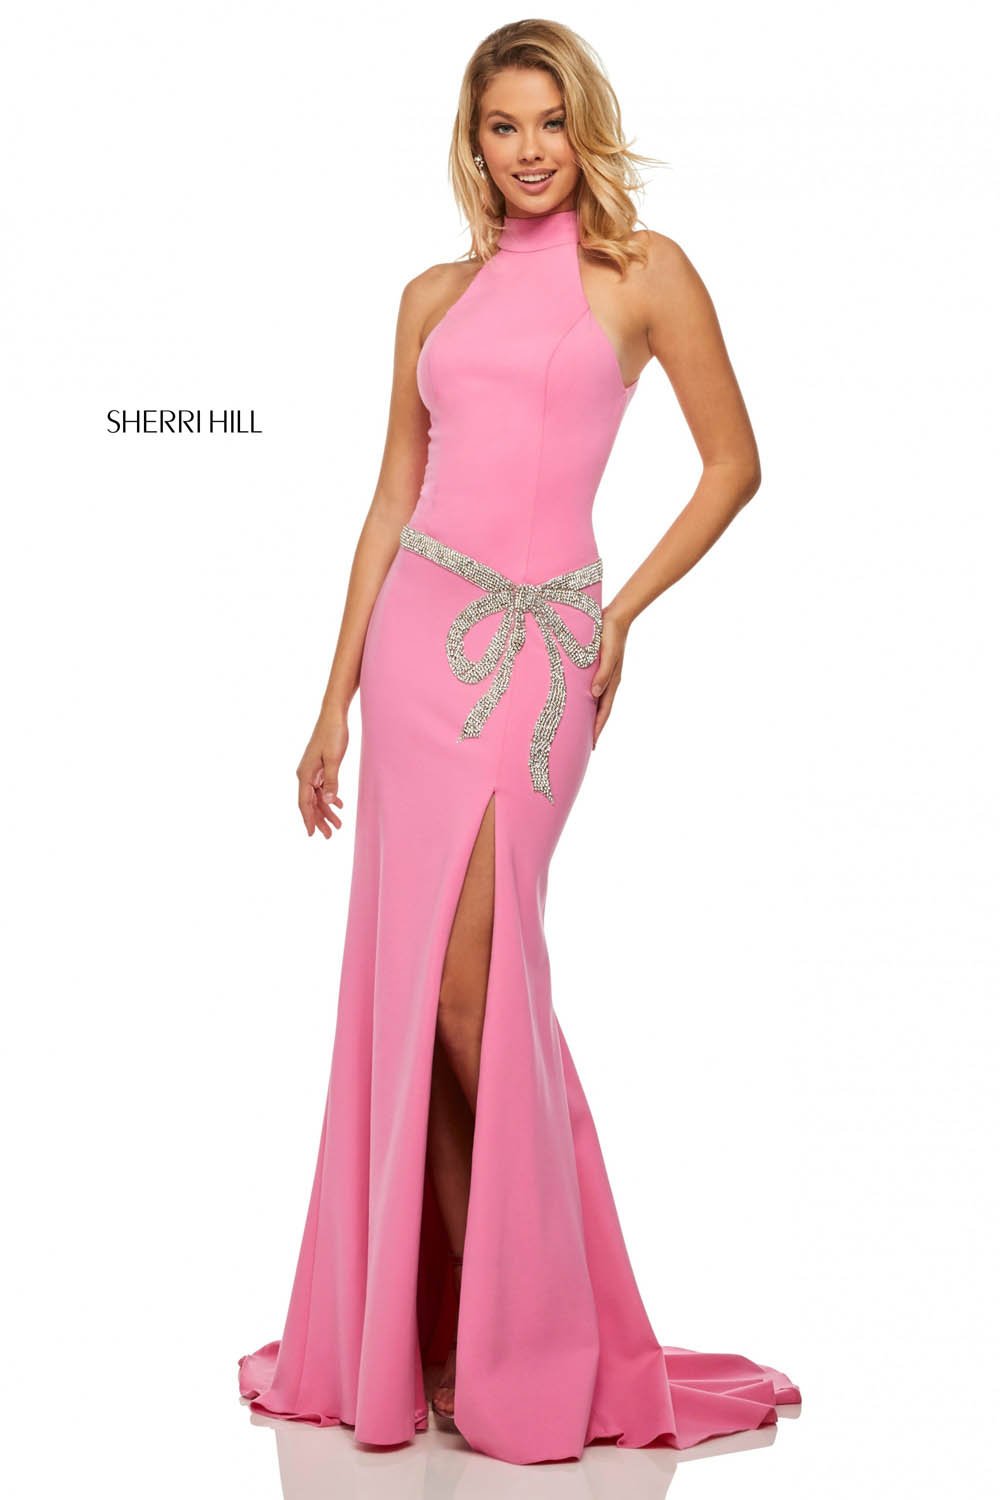 Sherri Hill 52288 dress images in these colors: Ivory Silver, Red Silver, Black Silver, Candy Pink Silver.